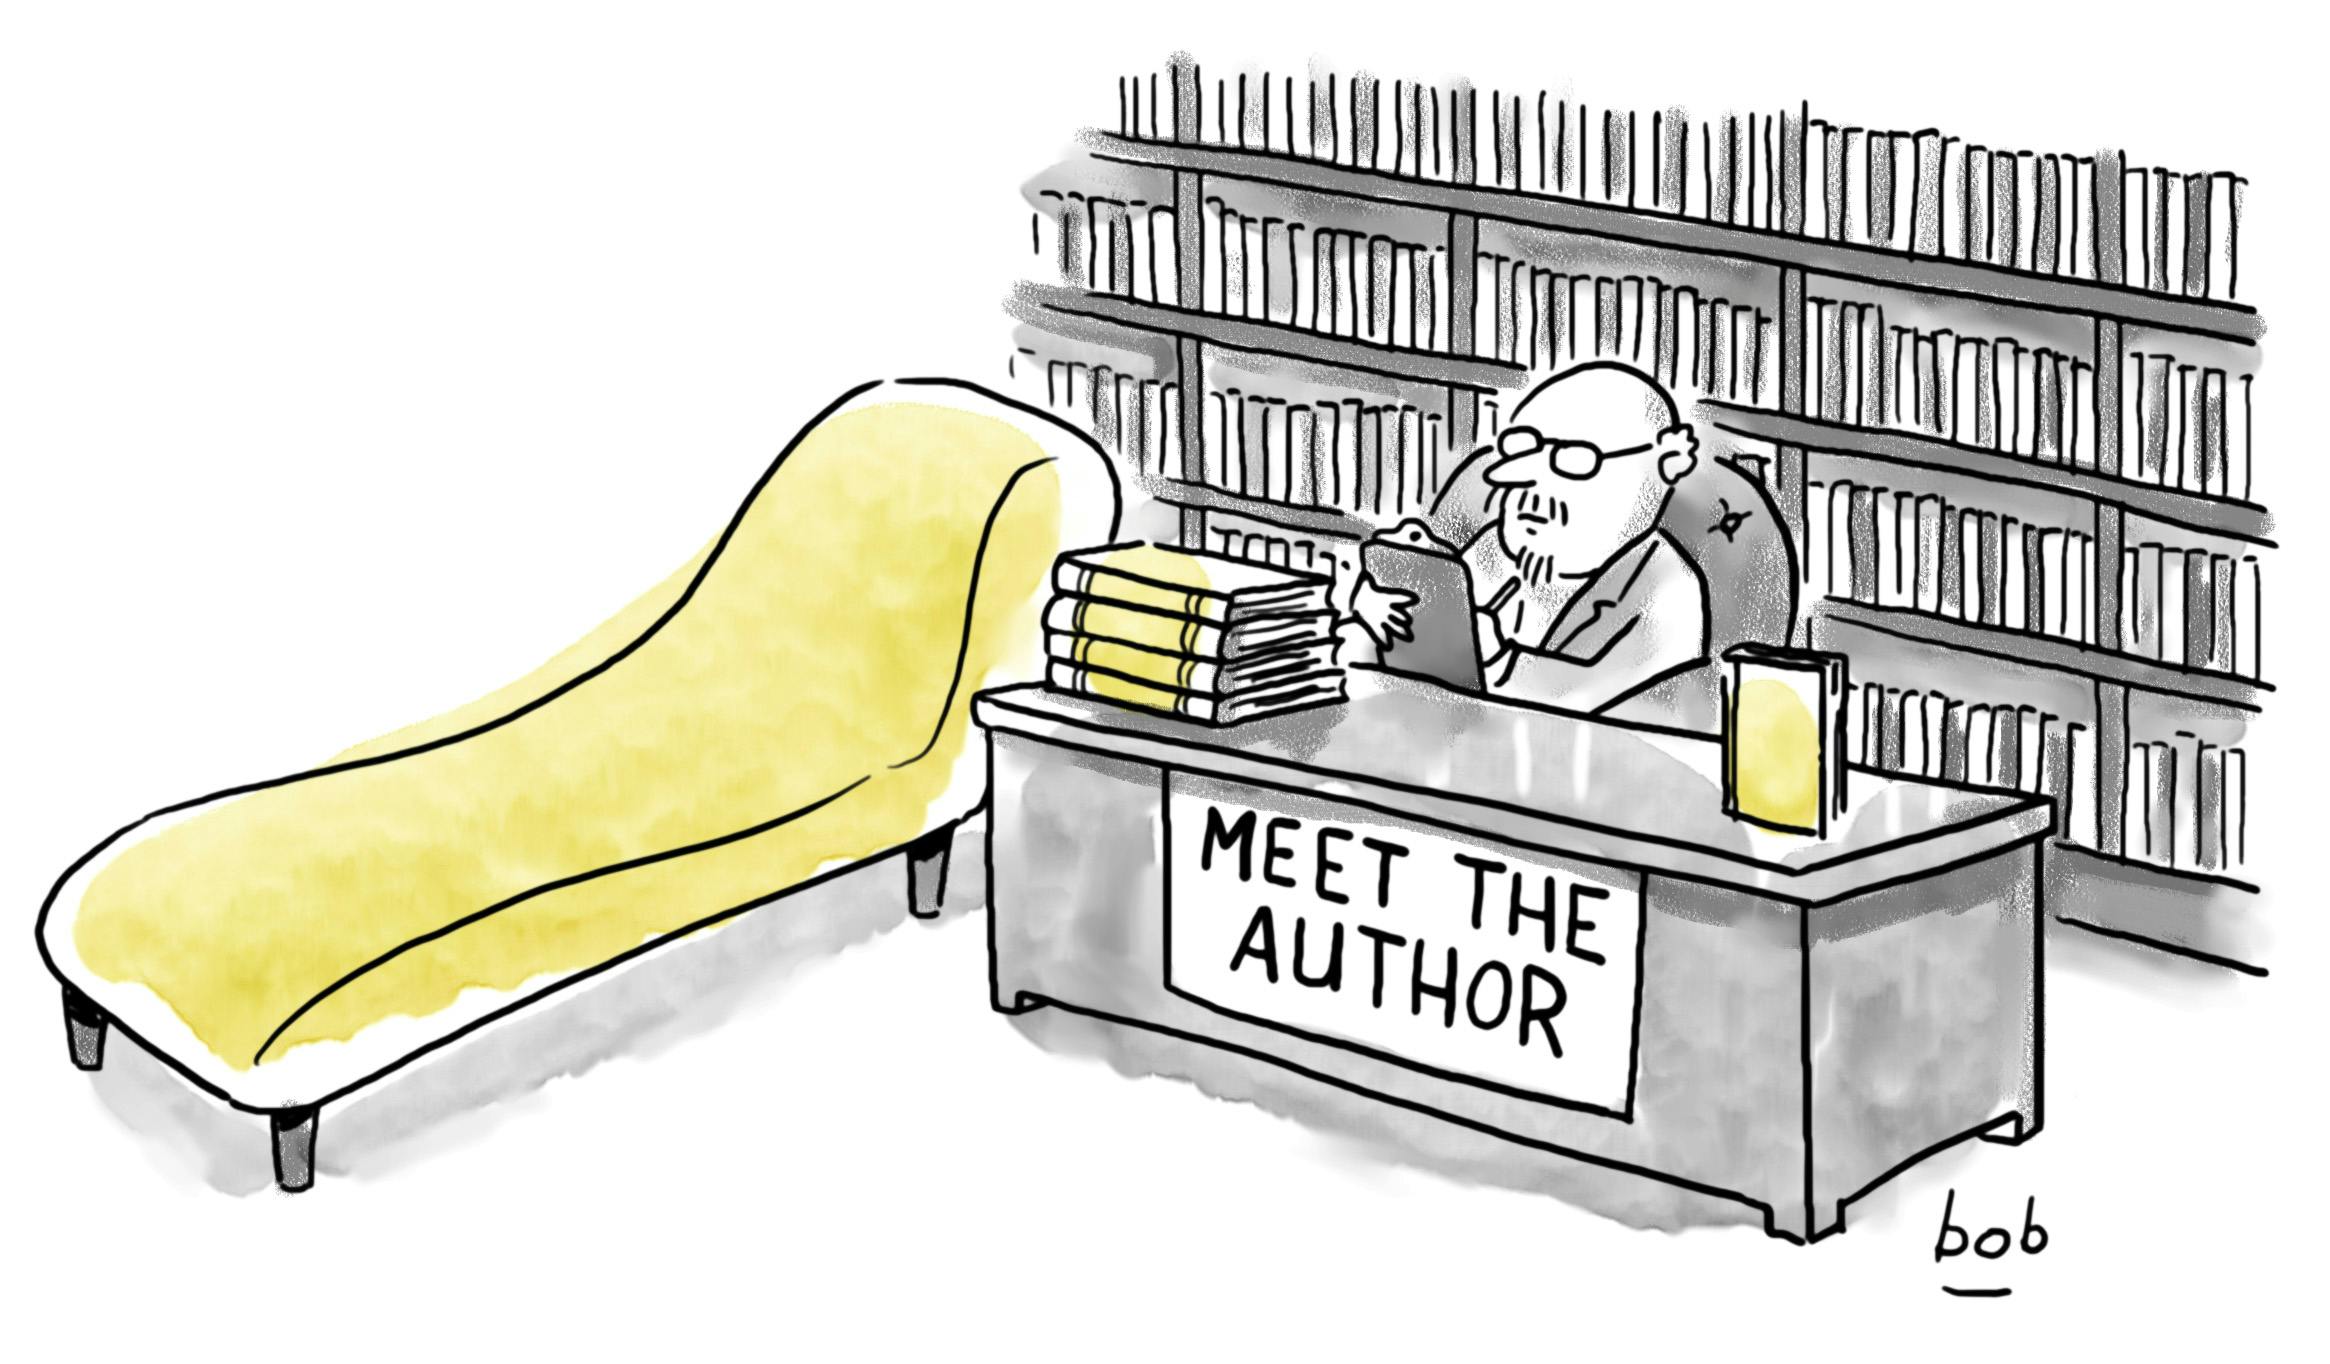 Cartoon by Bob Eckstein. In front of many bookshelves and with an empty sofa nearby, a psychoanalyst sits at a desk, writing in a notepad. A stack of books sit atop the desk, and on the front of the desk is a sign reading “Meet the author”.